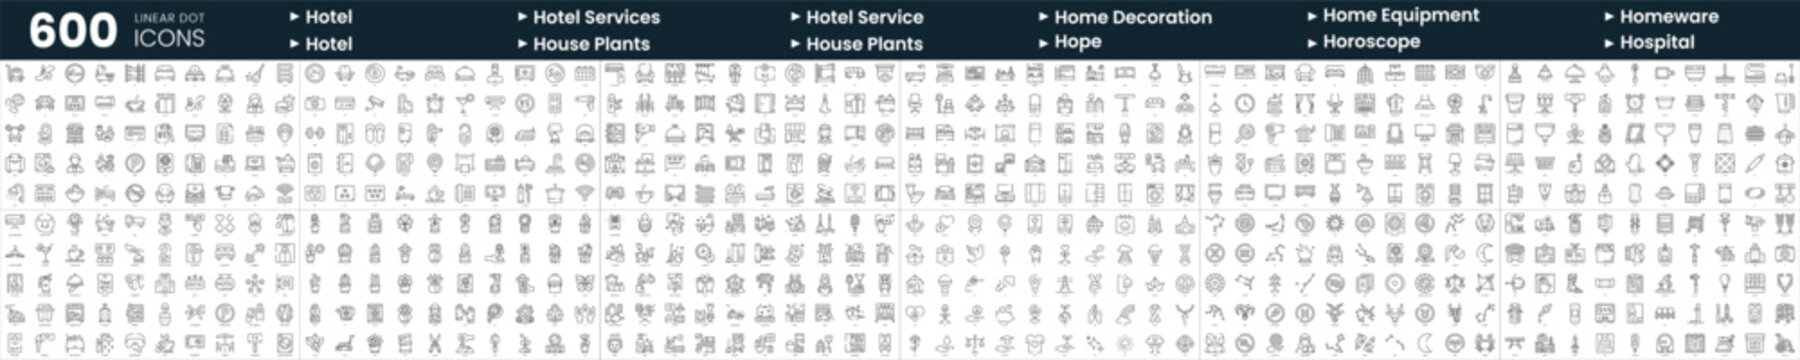 Set of 600 thin line icons. In this bundle include home decoration, homeware, horoscope, hotel and more